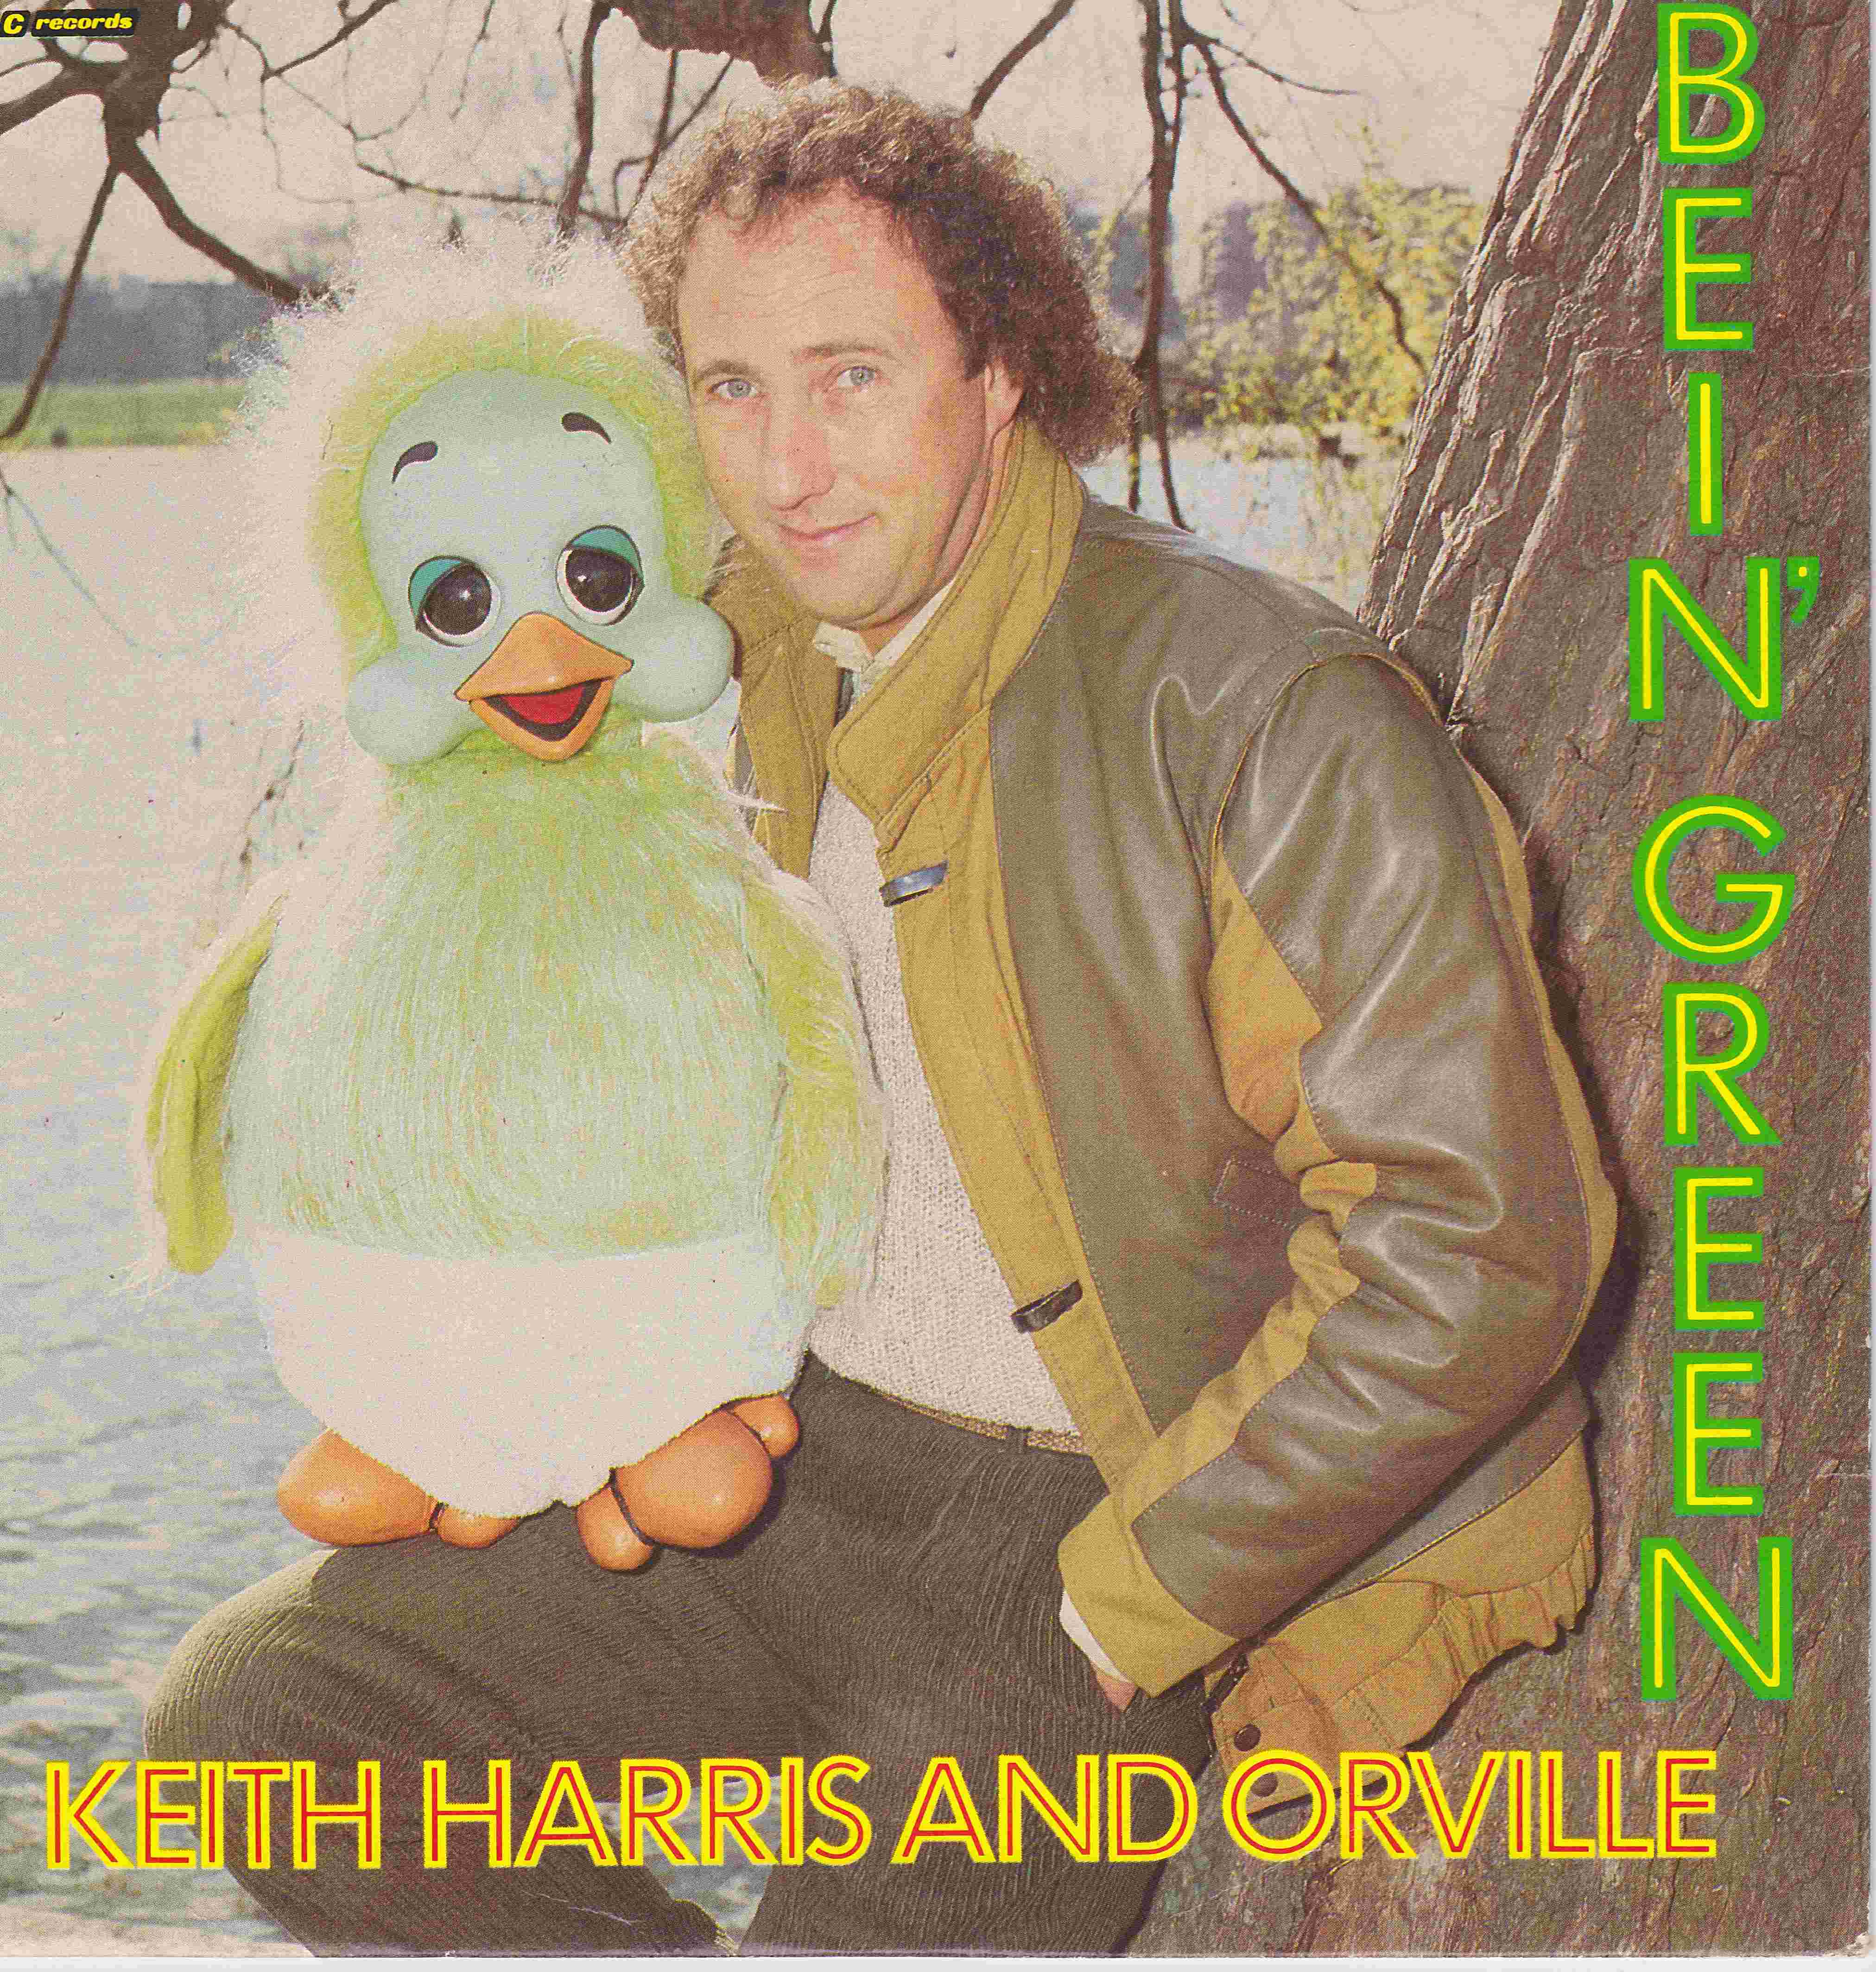 Picture of RESL 145 Bein' green by artist Keith Harris and Orville / Arr. Nigel Hess / Bobby Crush from the BBC records and Tapes library